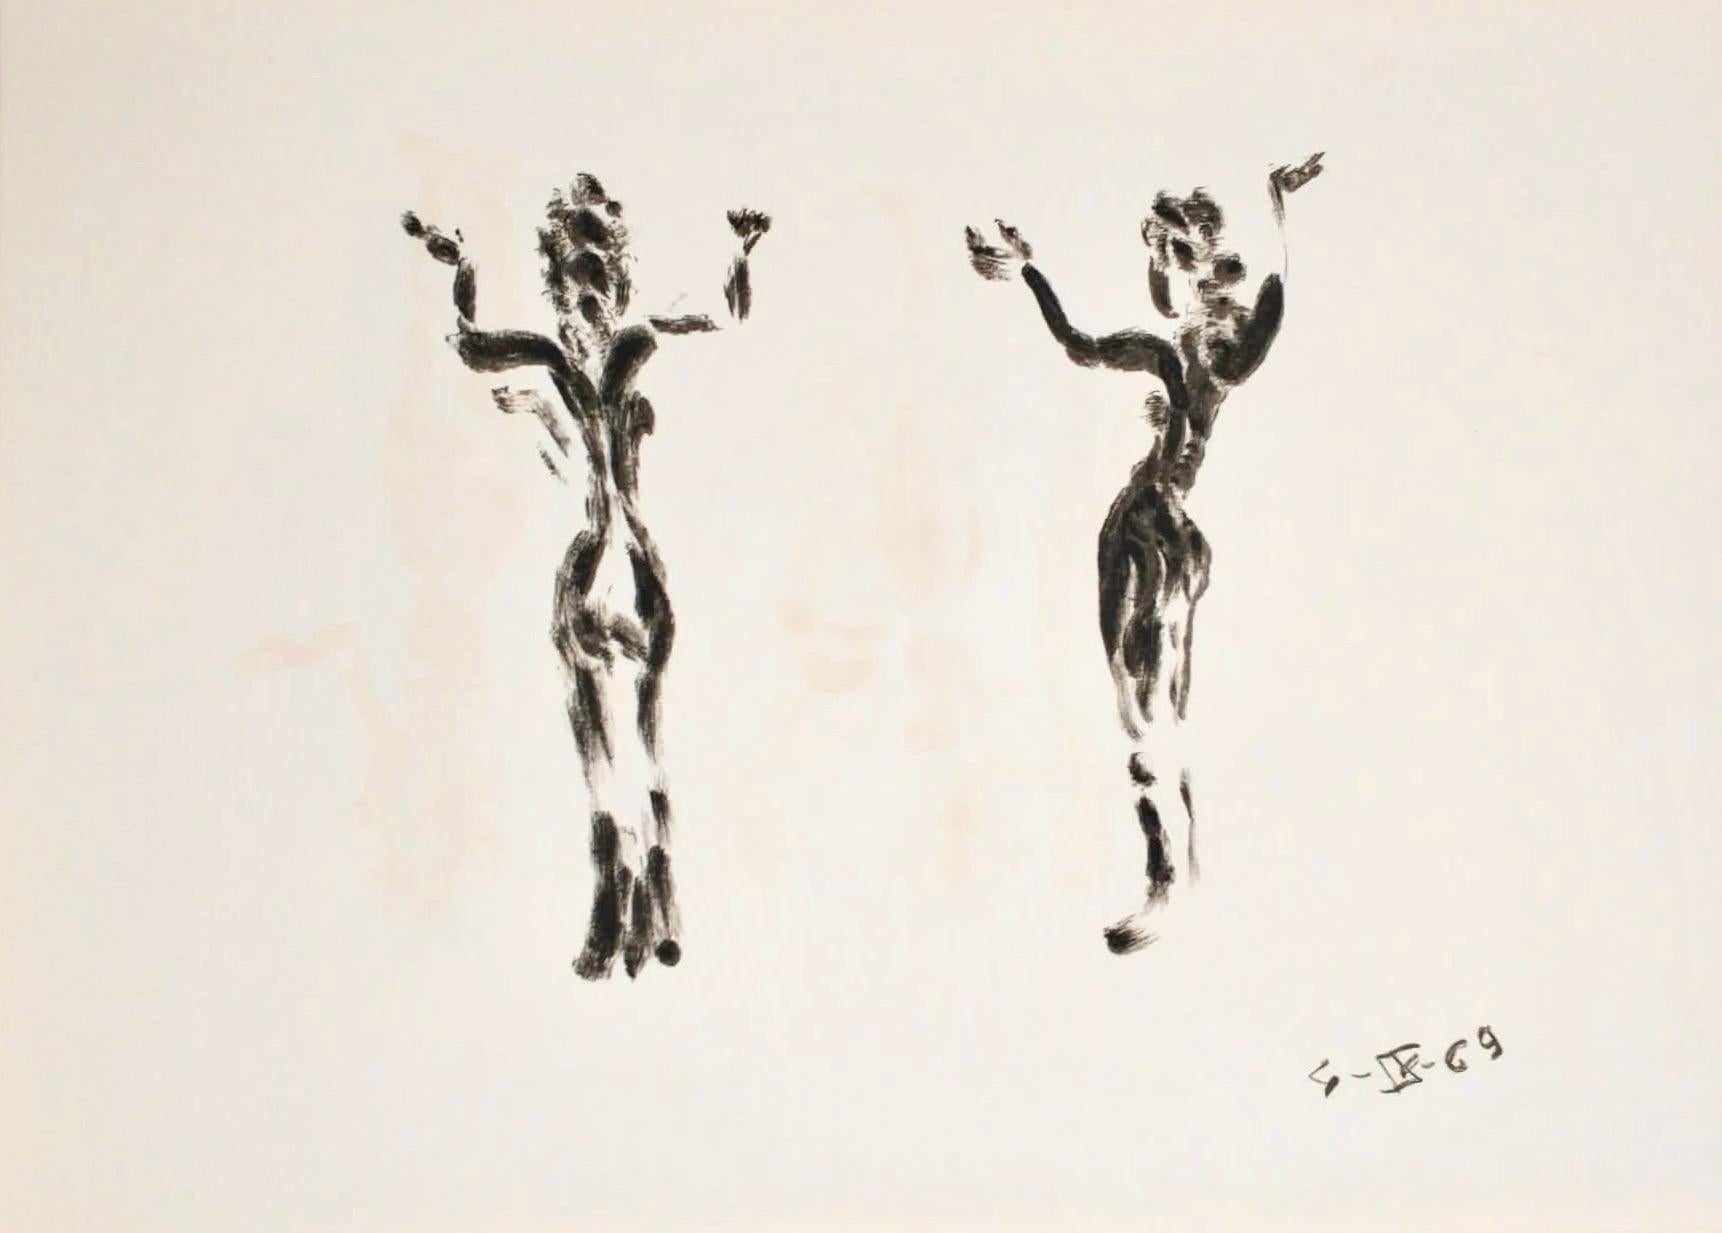 Apelles Fenosa Figurative Print - Apeles Fenosa Spanish Sculptor Mourlot Lithograph Abstract Expressionist Figures